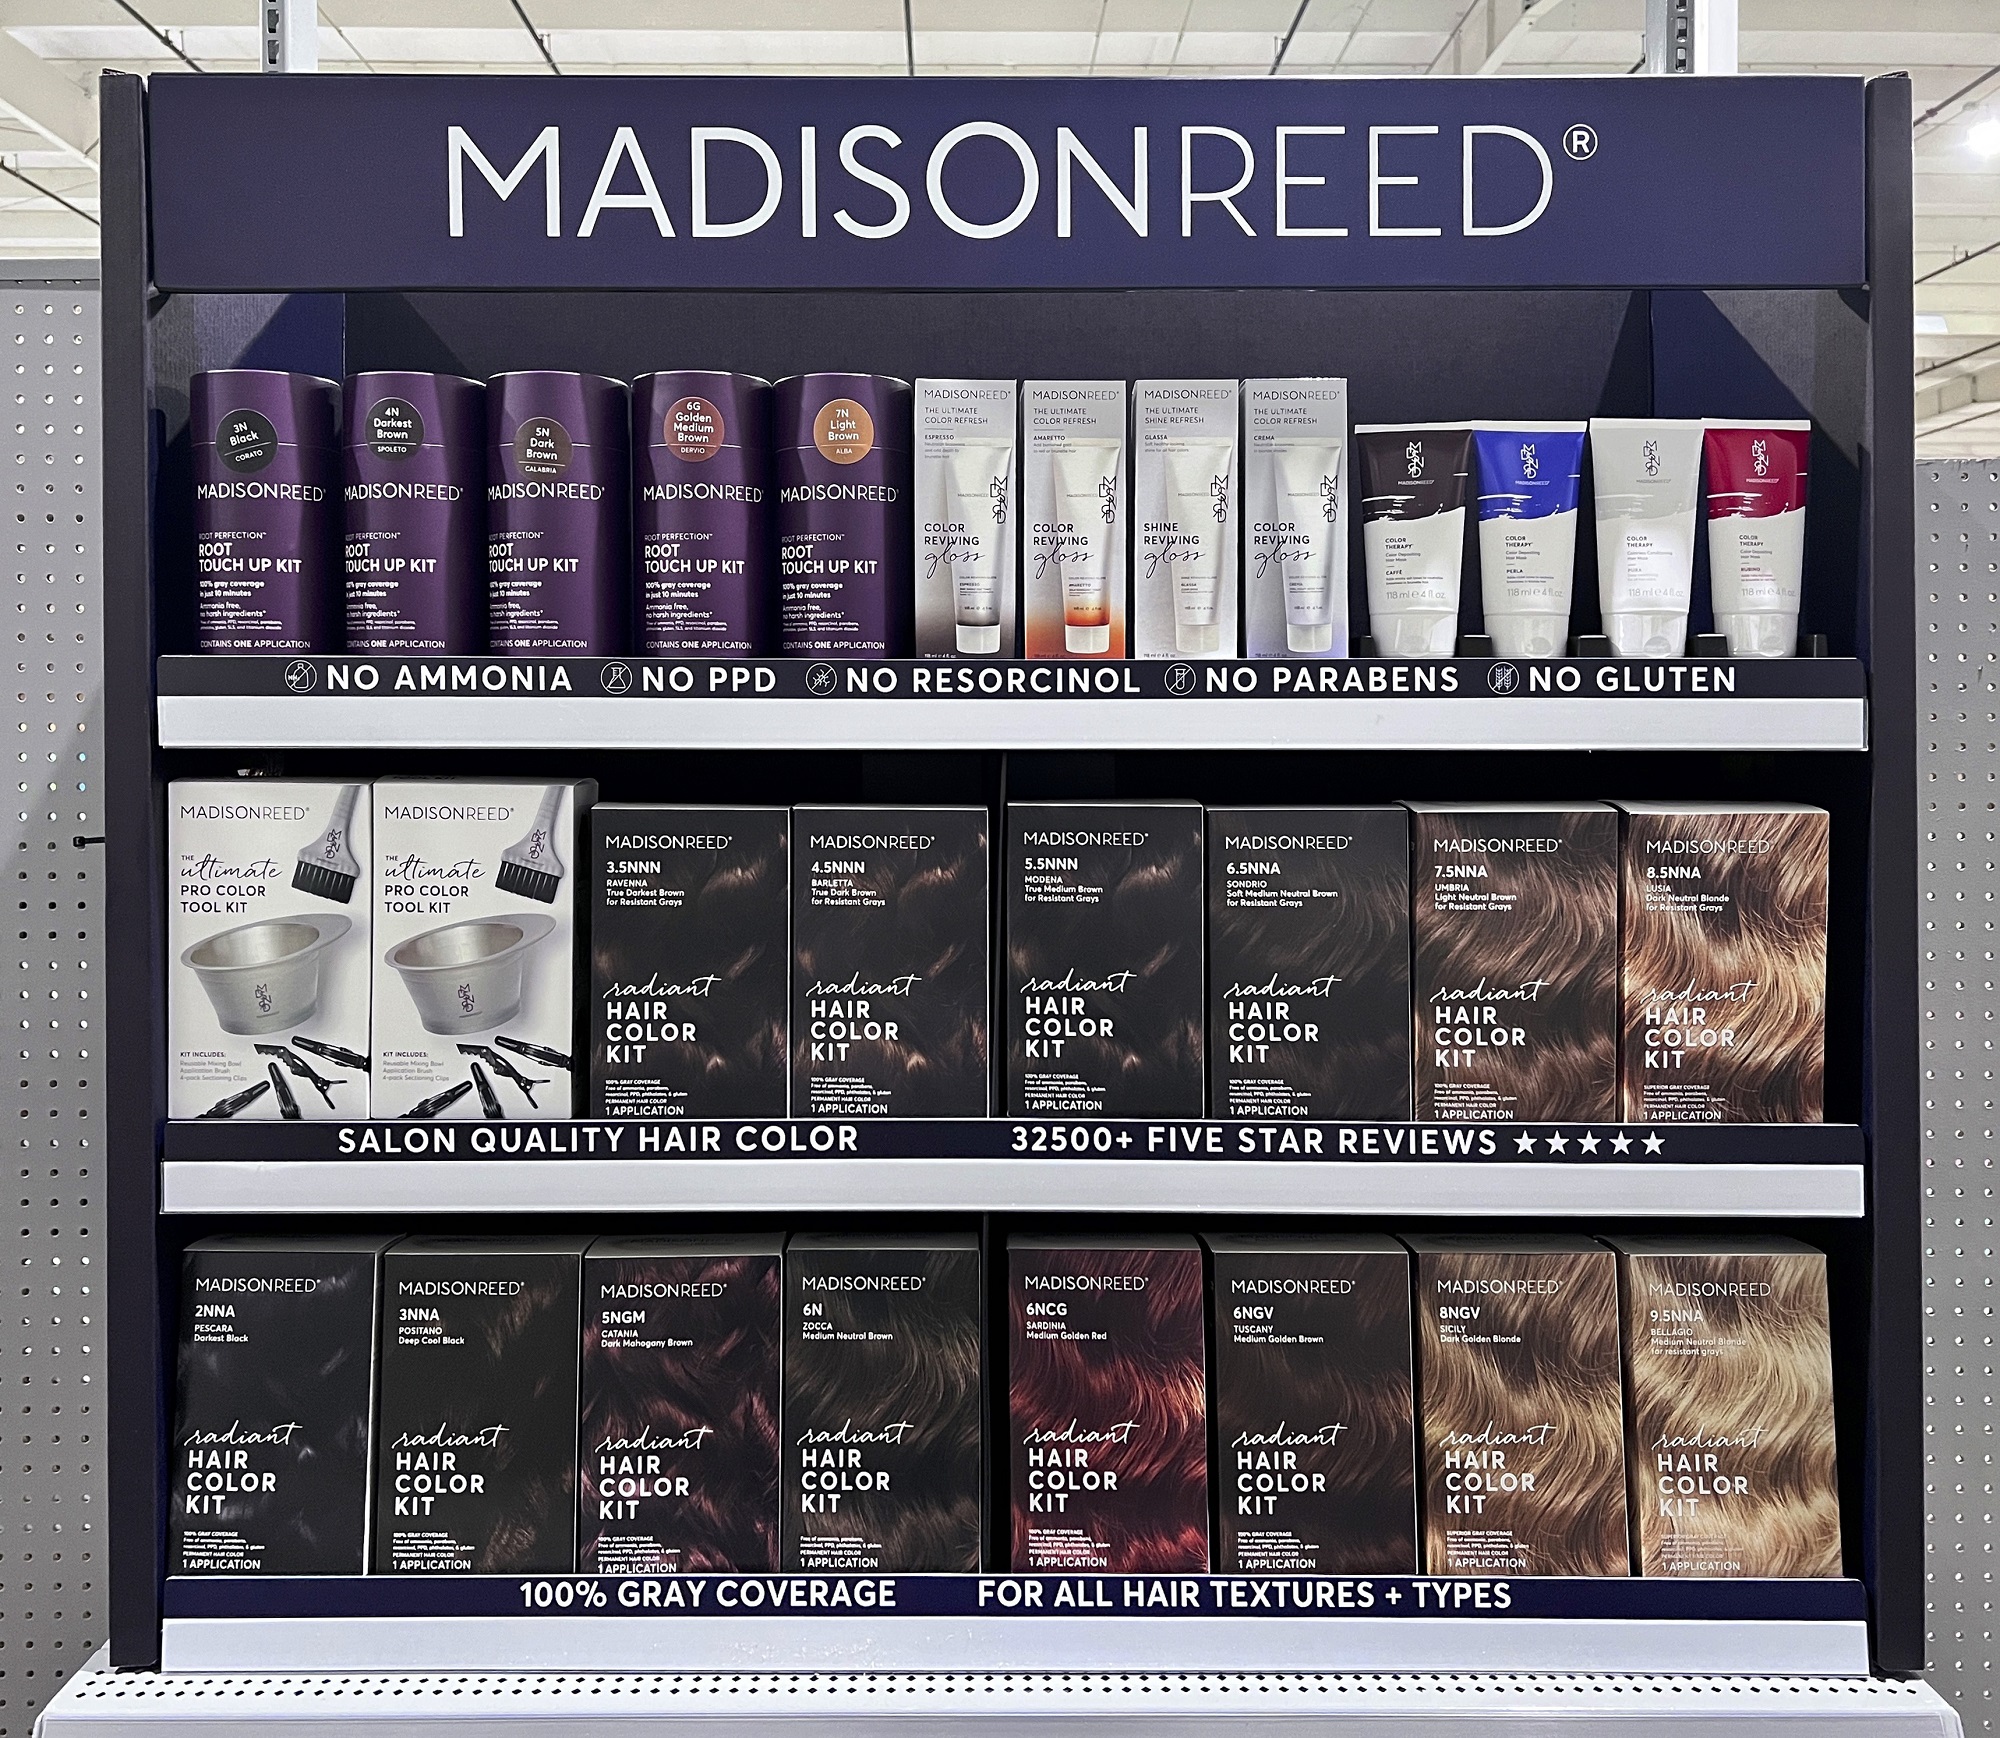 What Color Is My Hair? Color Levels Guide, Madison Reed